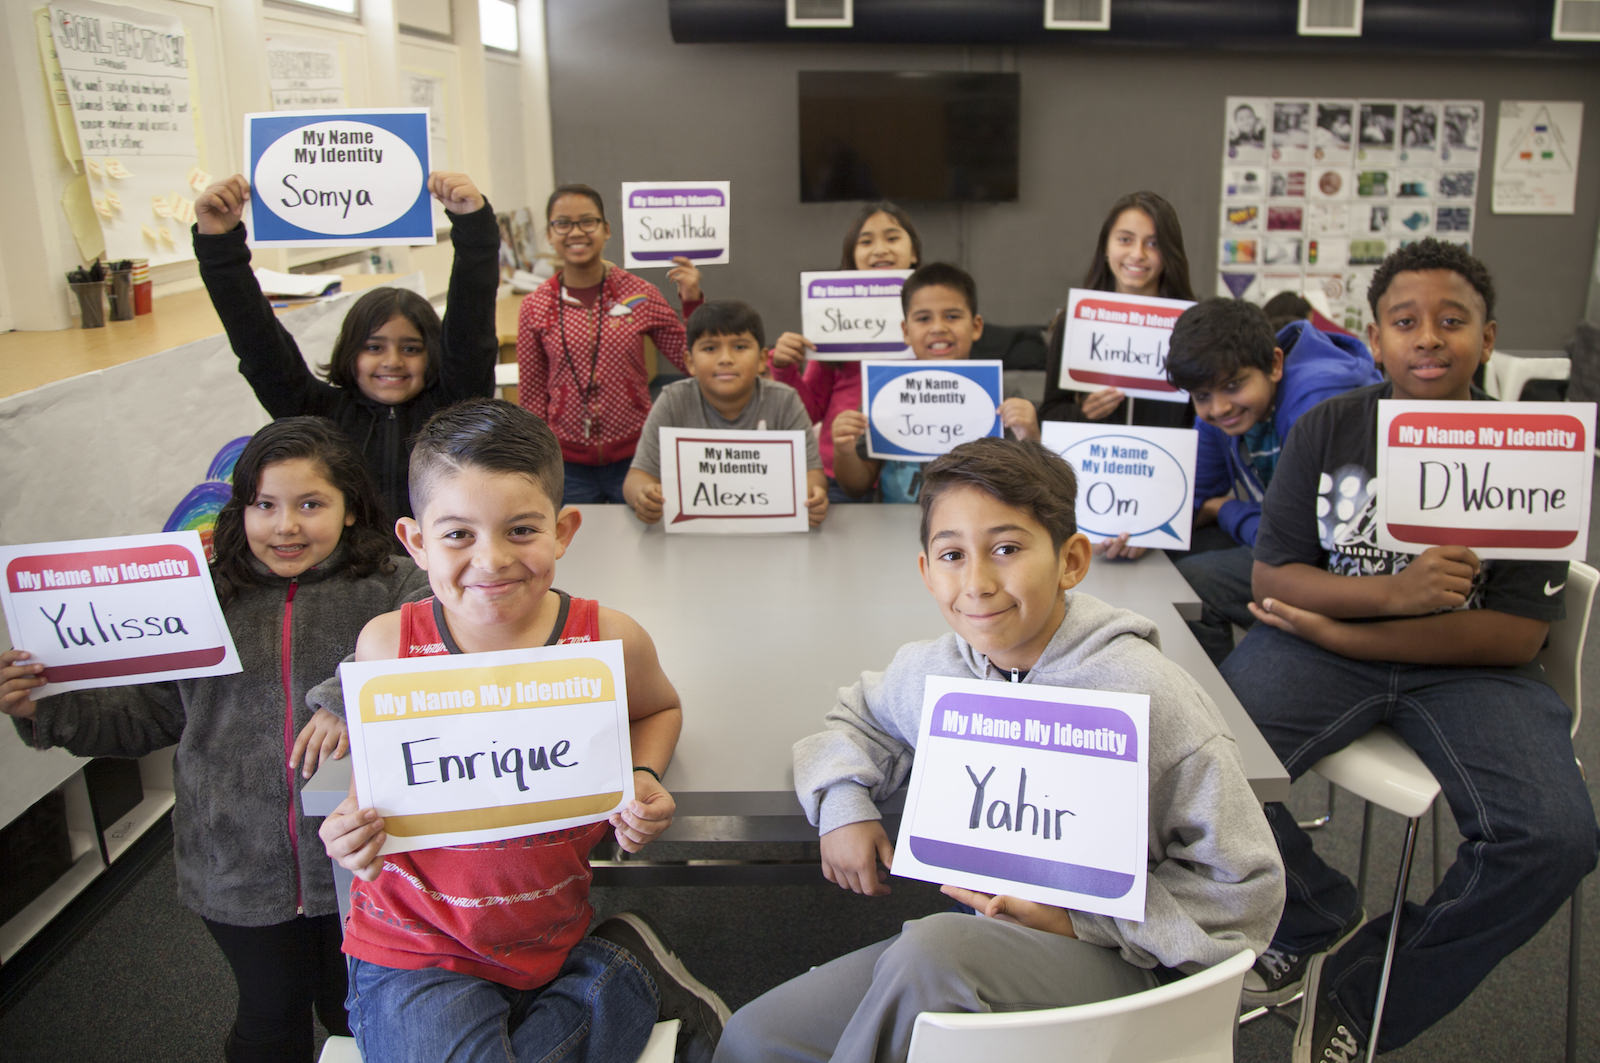 Students in a classroom holding up signs with their names on them